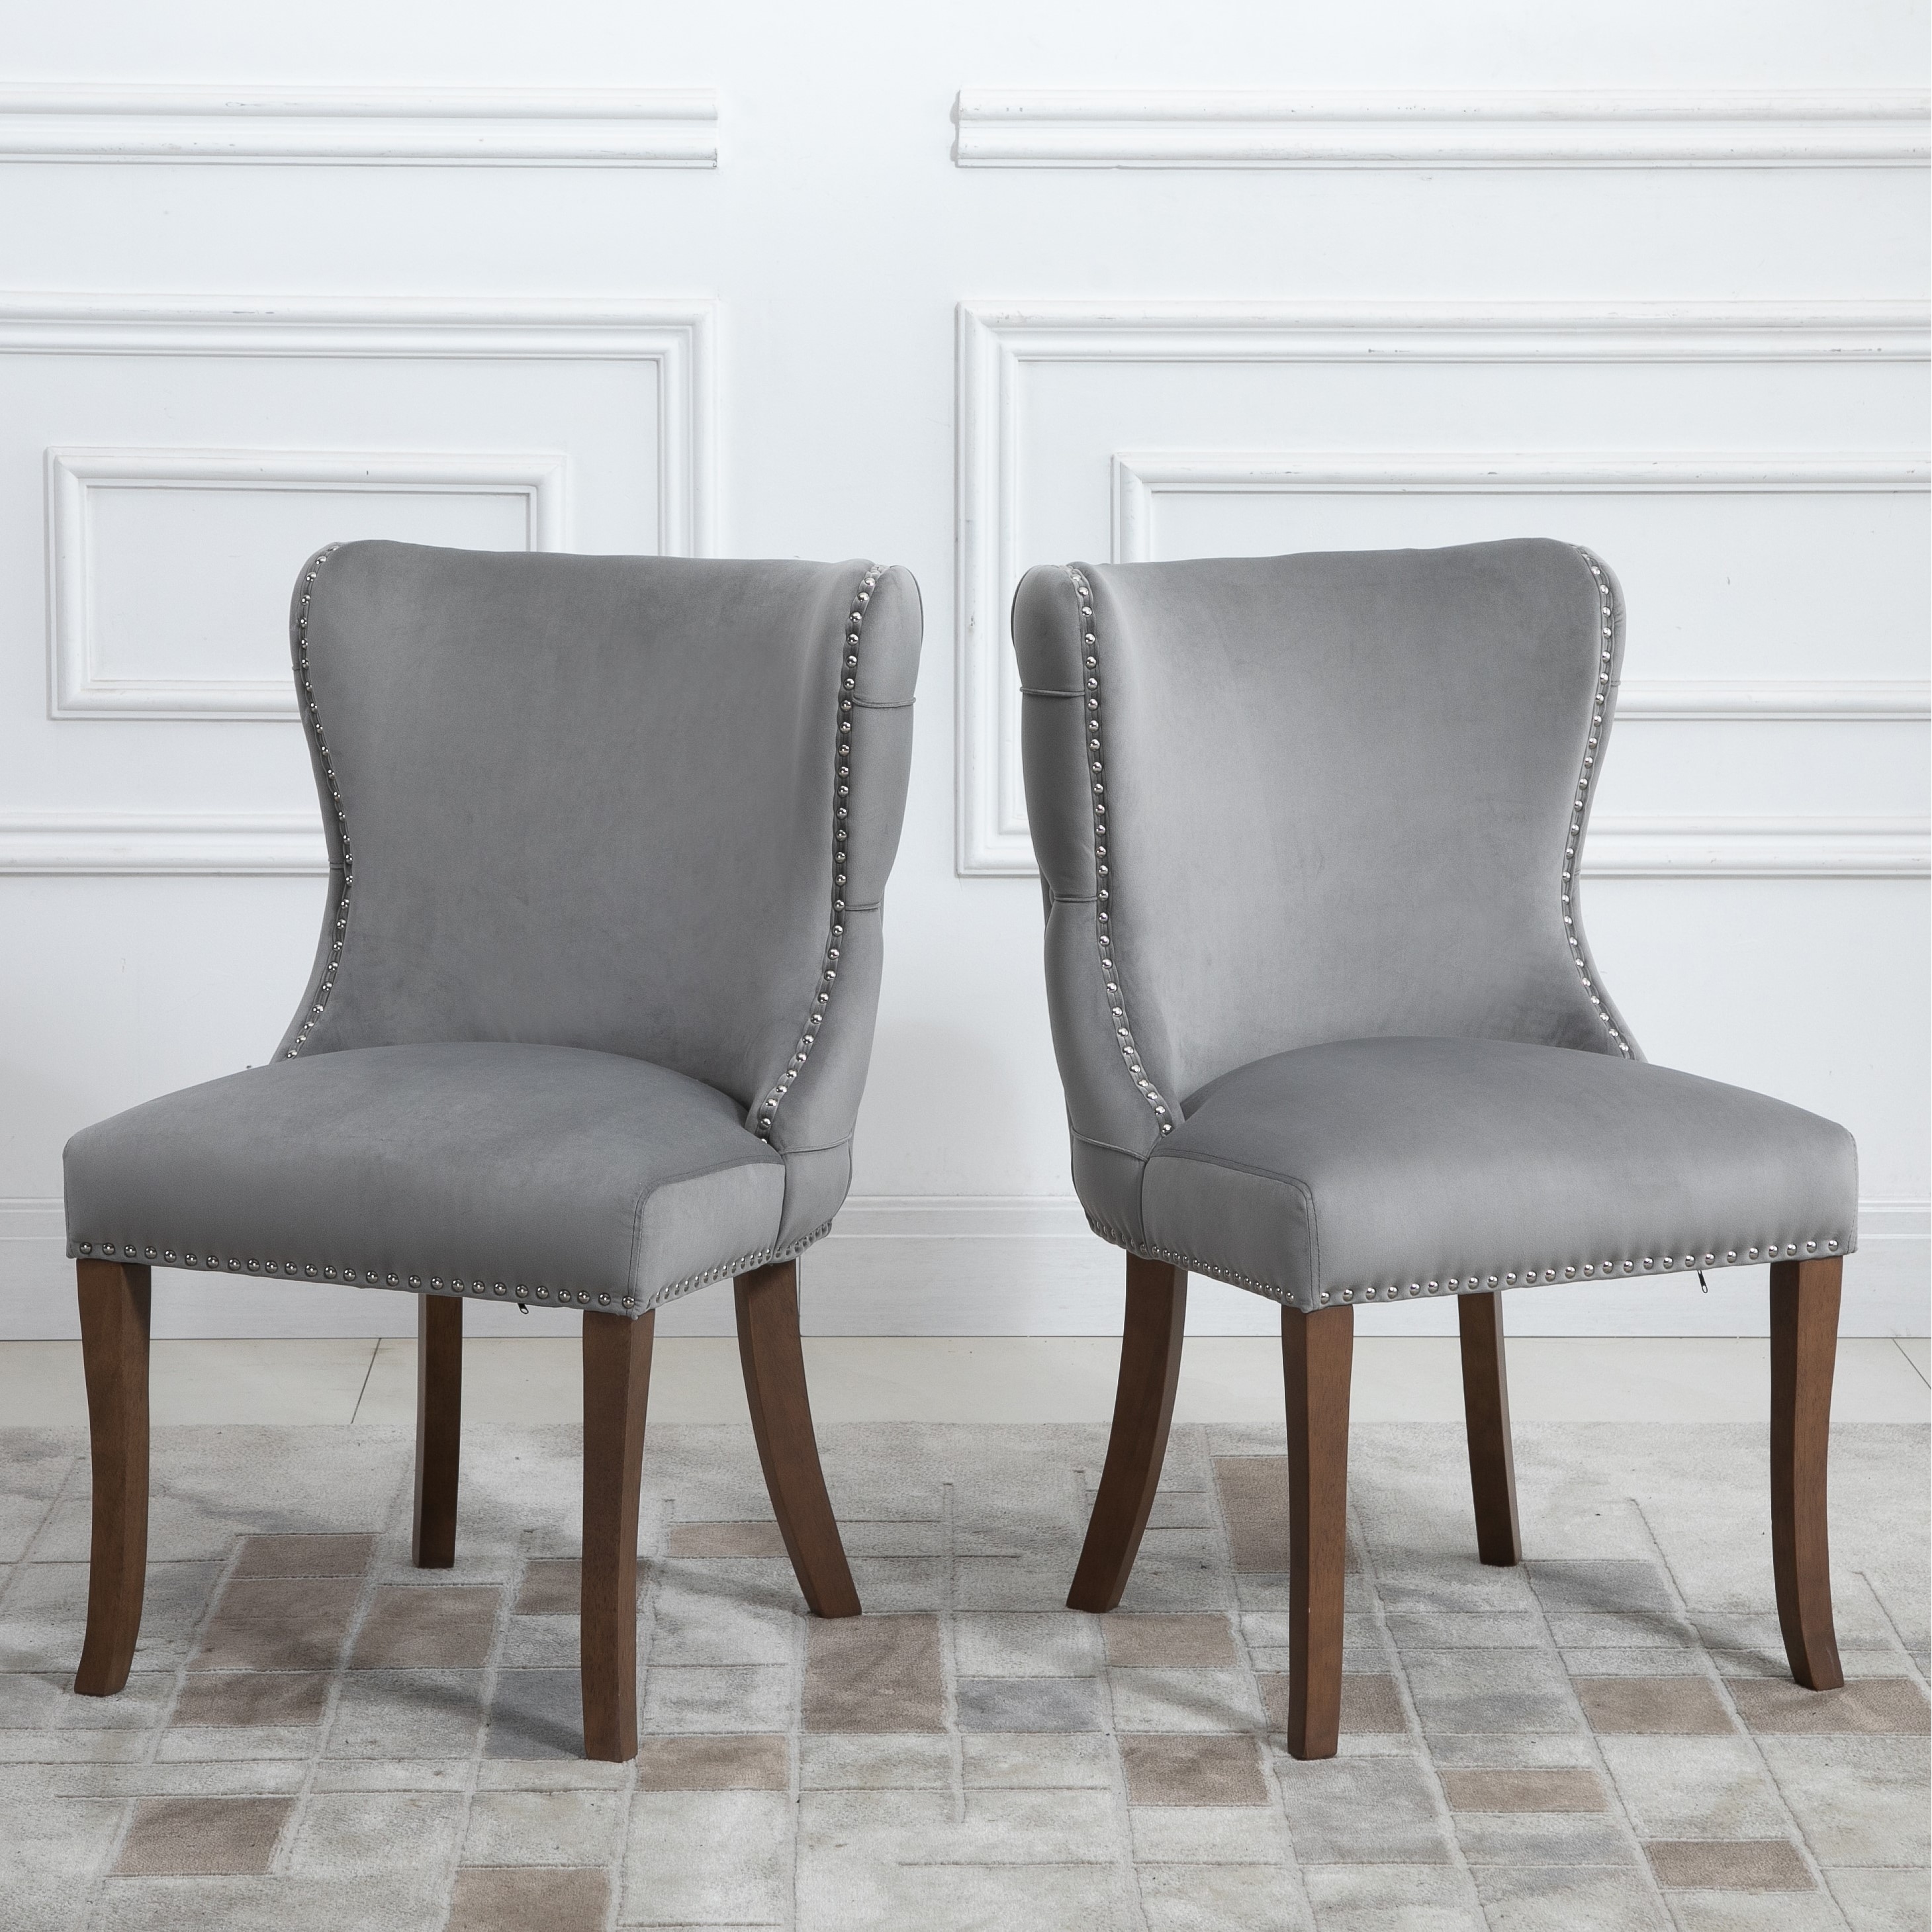 upholstered wing-back dining chair with backstitching nailhead trim